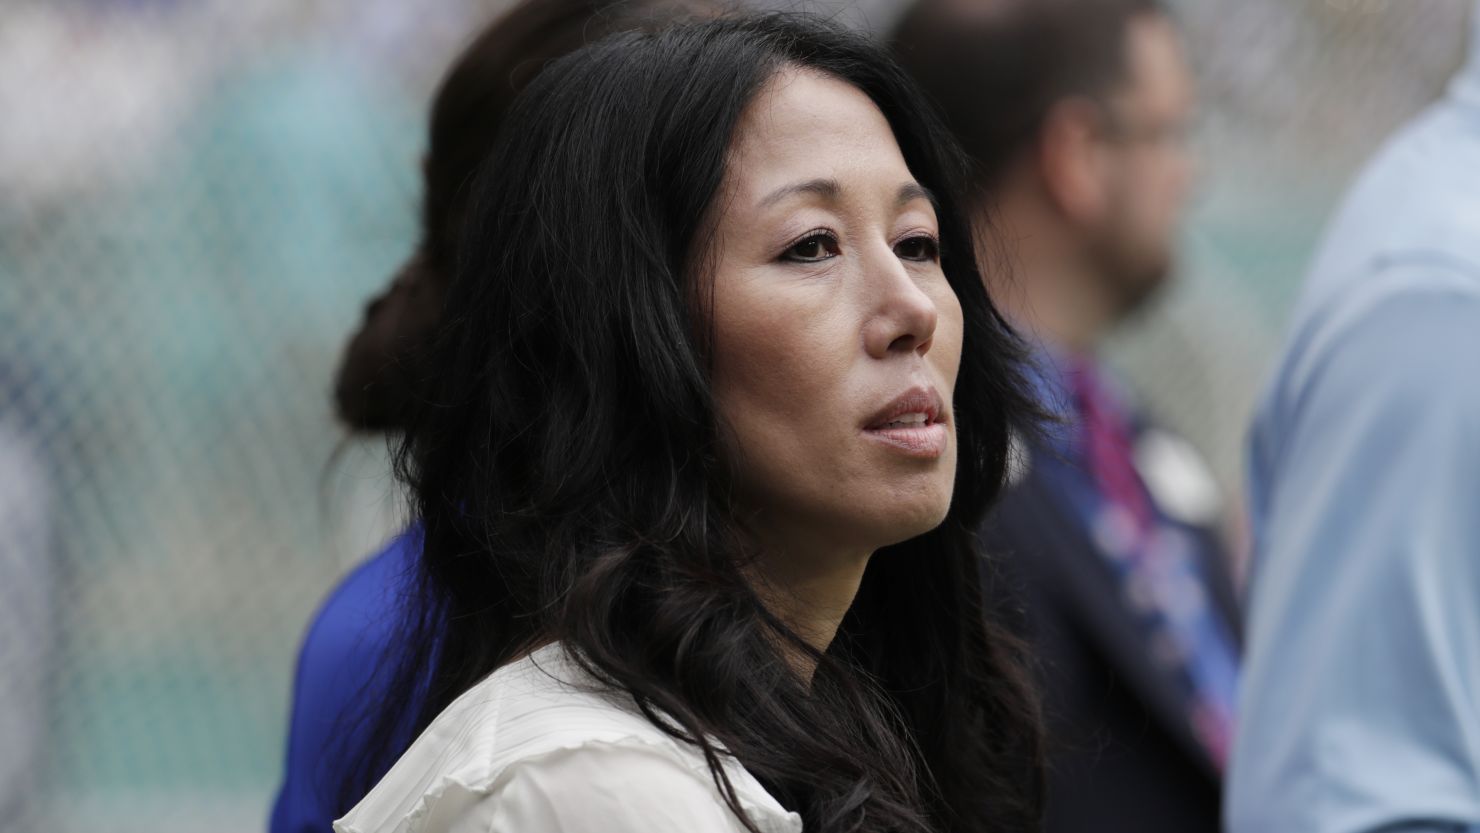 Kim Pegula has been the co-owner of the Bills since 2014.